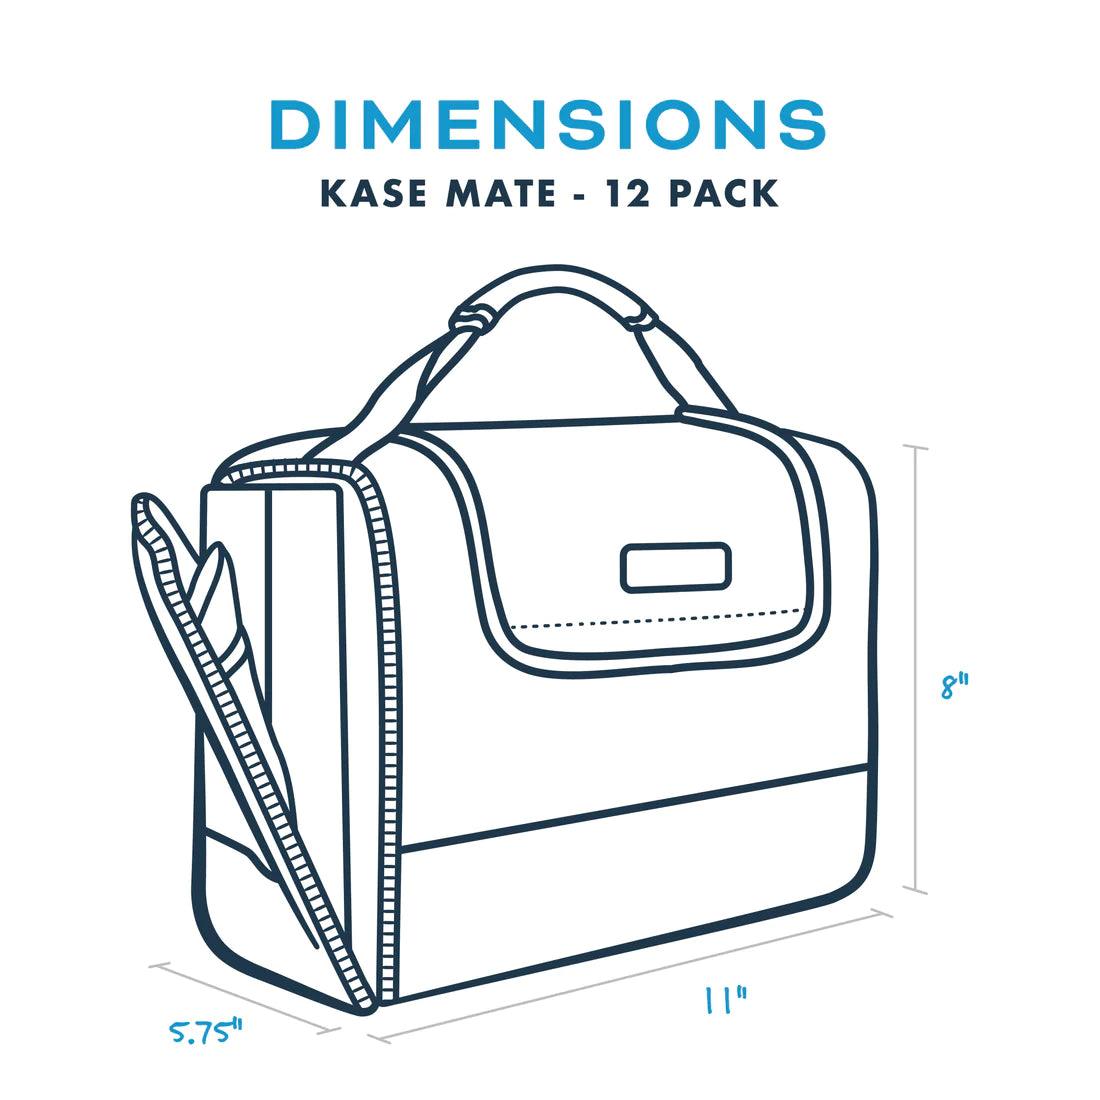 Dimensions of Kase Mate, 5.75" x 11" x 8"